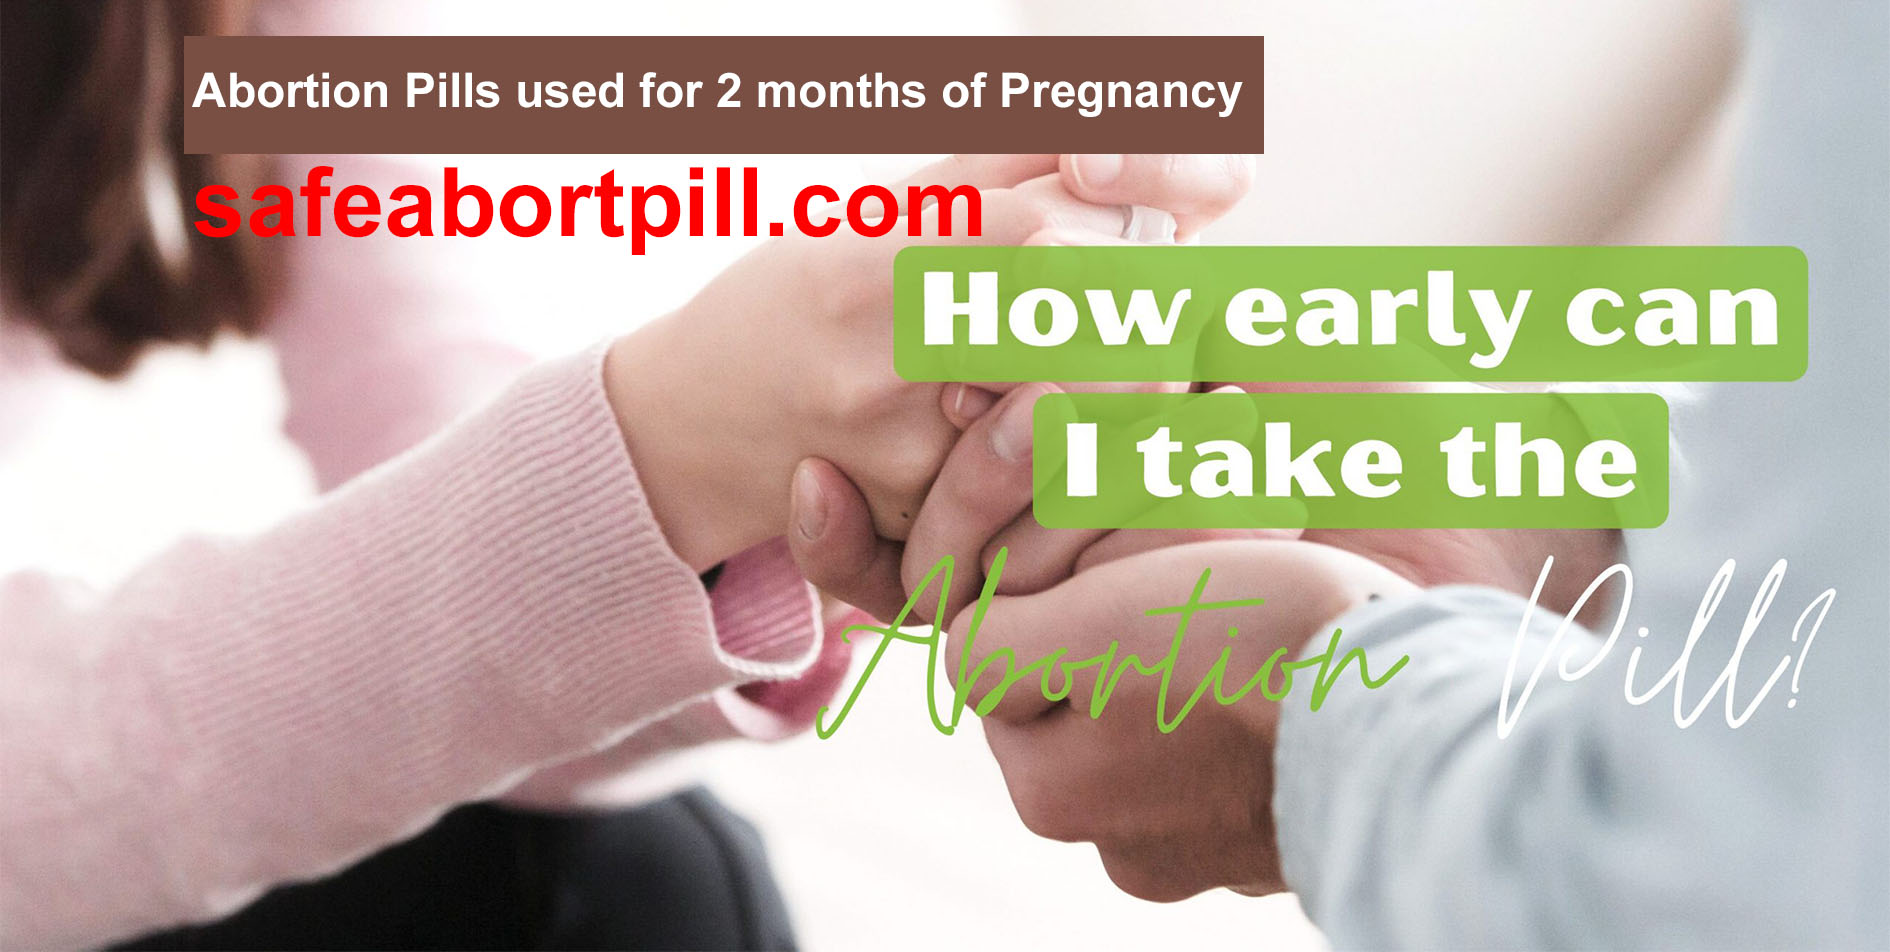 How-early-can-I-take-abortion-pill-scaled